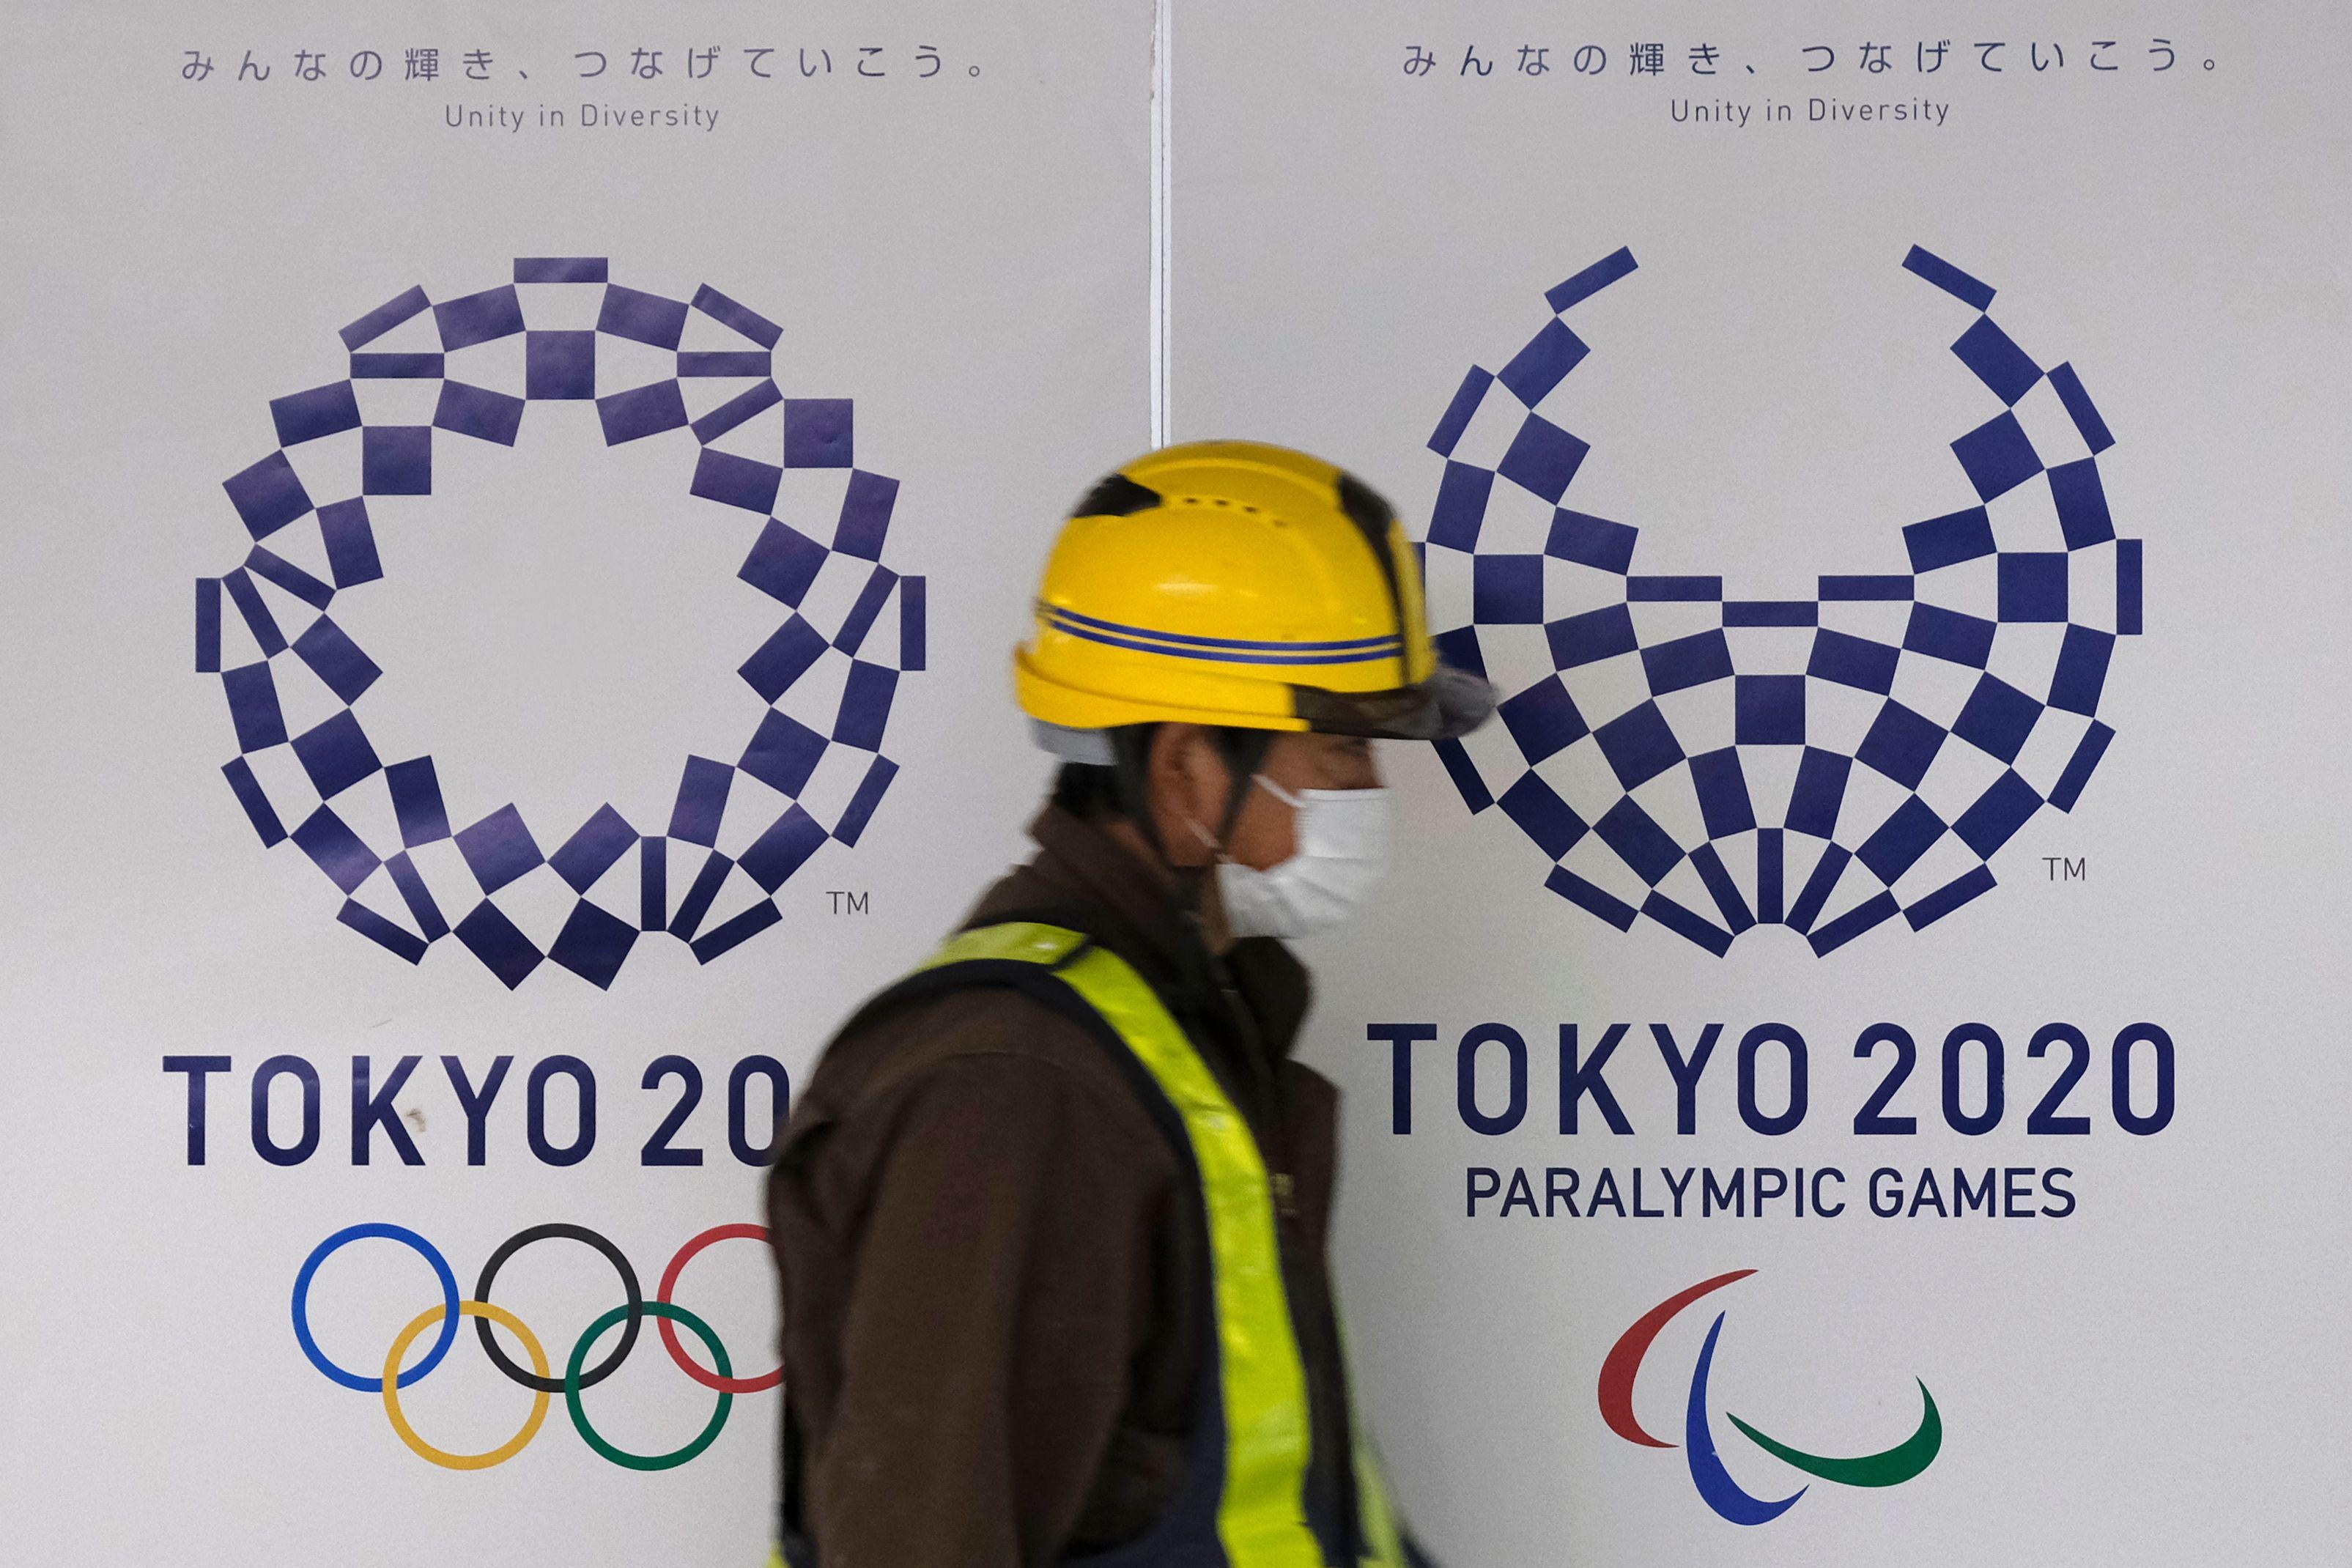 A worker wearing a mask walks by the logo of the Tokyo 2020 Olympic Games and Paralympic Games.